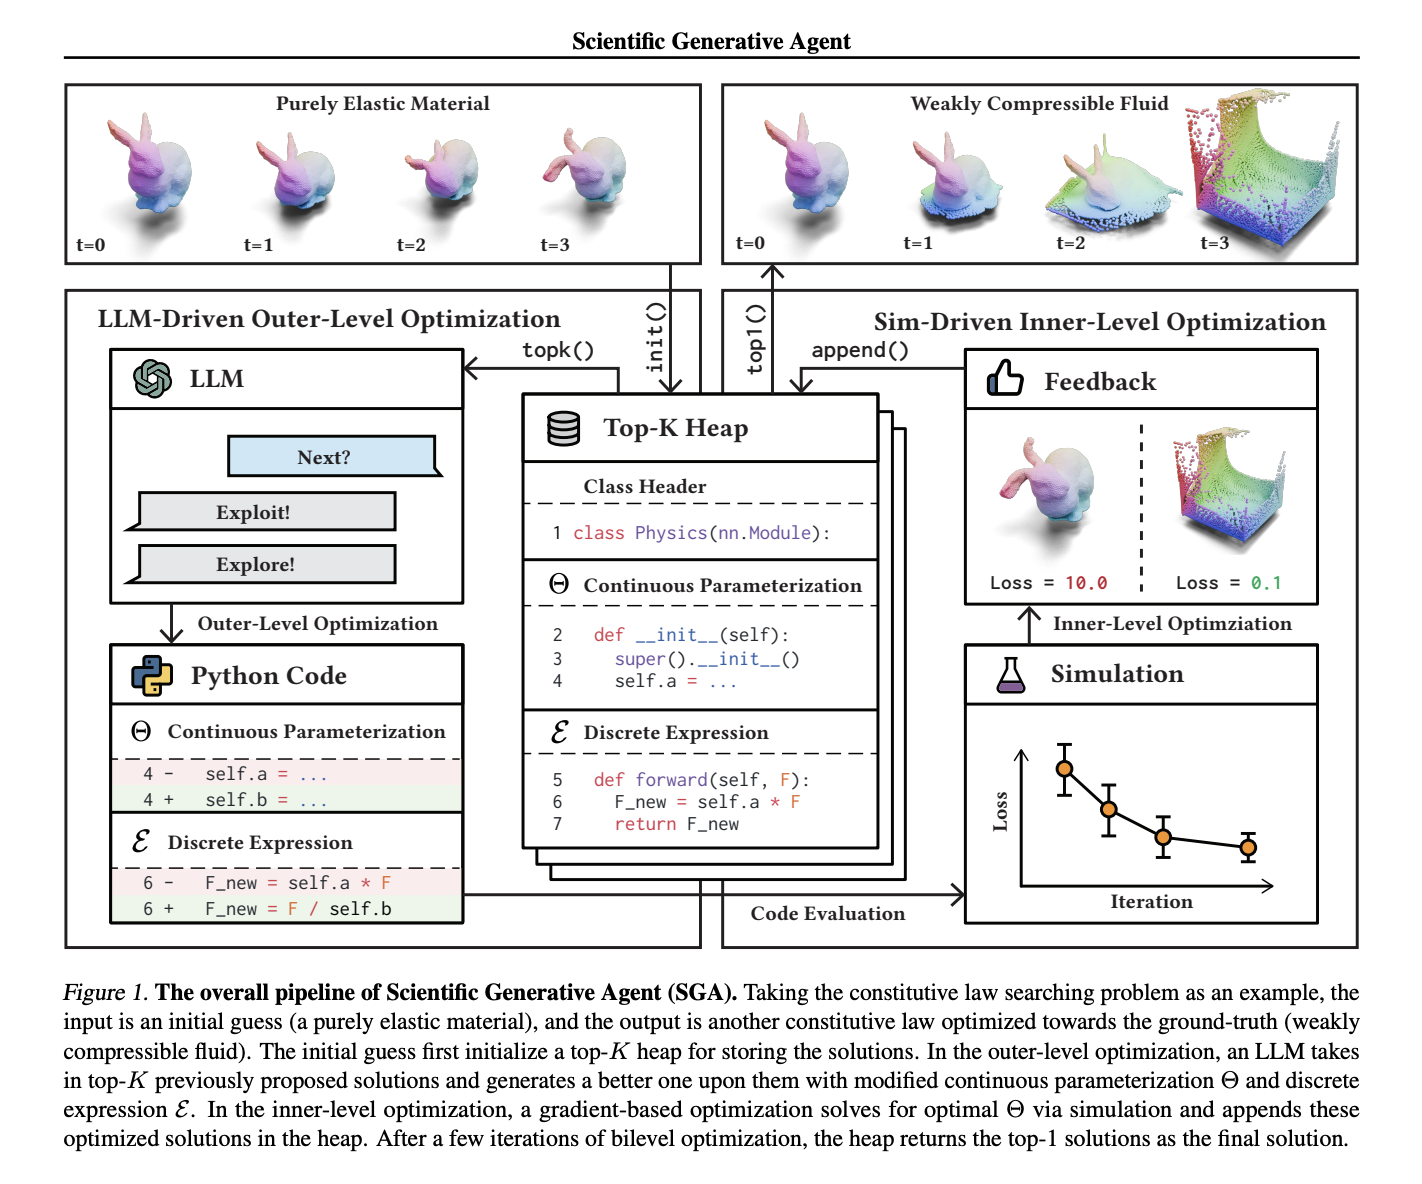  This AI Paper Introduces the Scientific Generative Agent: A Unified Machine Learning Framework for Cross-Disciplinary Scientific Discovery